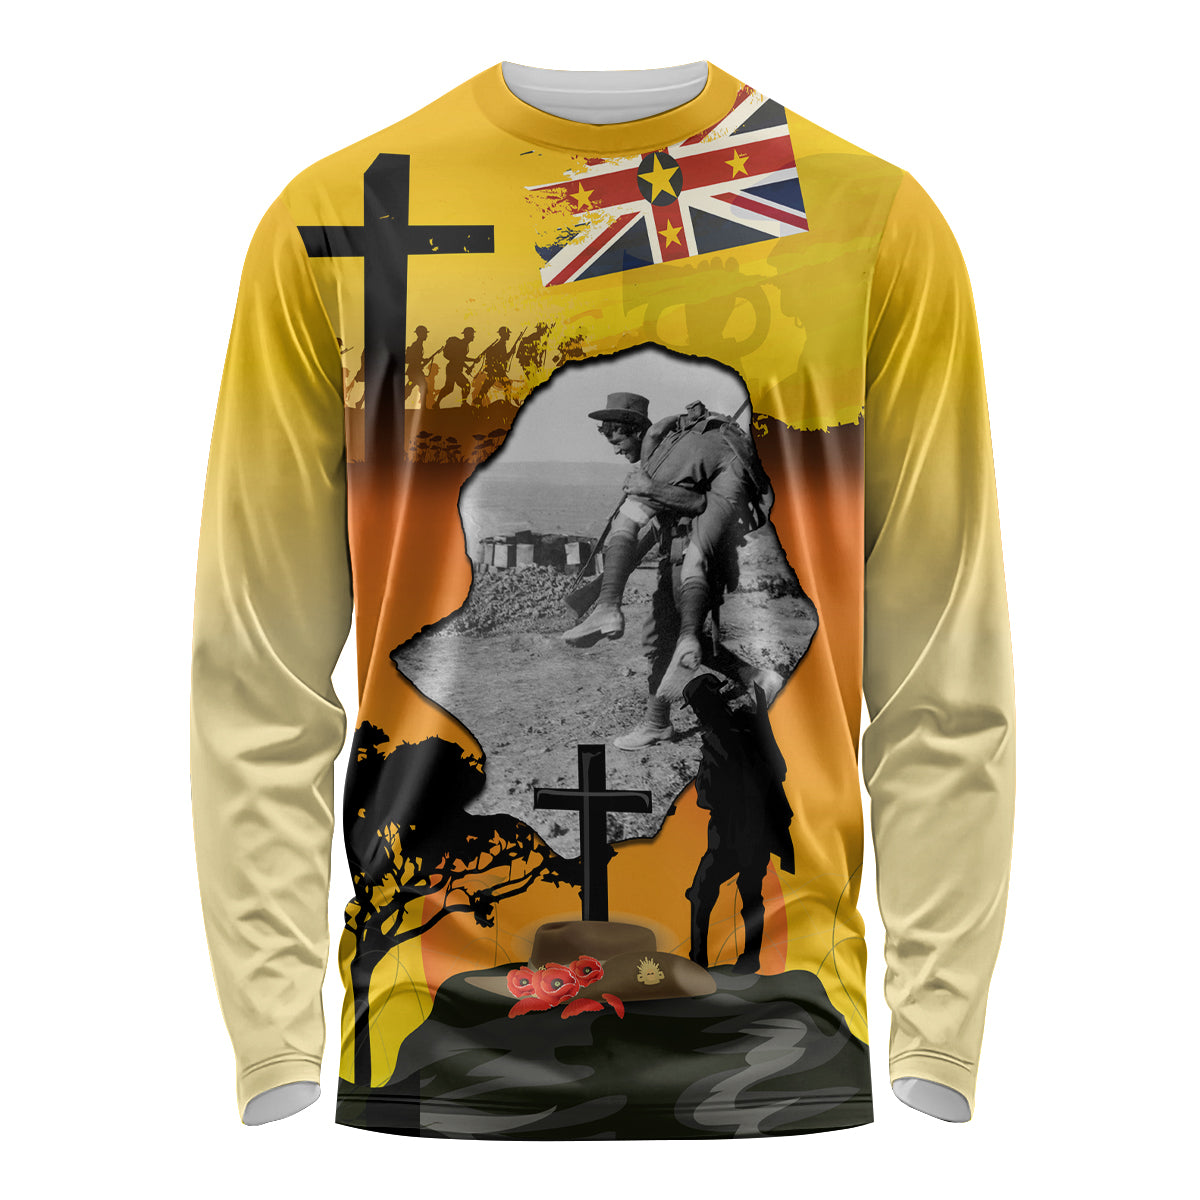 Niue ANZAC Day Long Sleeve Shirt Soldier and Gallipoli Lest We Forget LT03 Unisex Yellow - Polynesian Pride